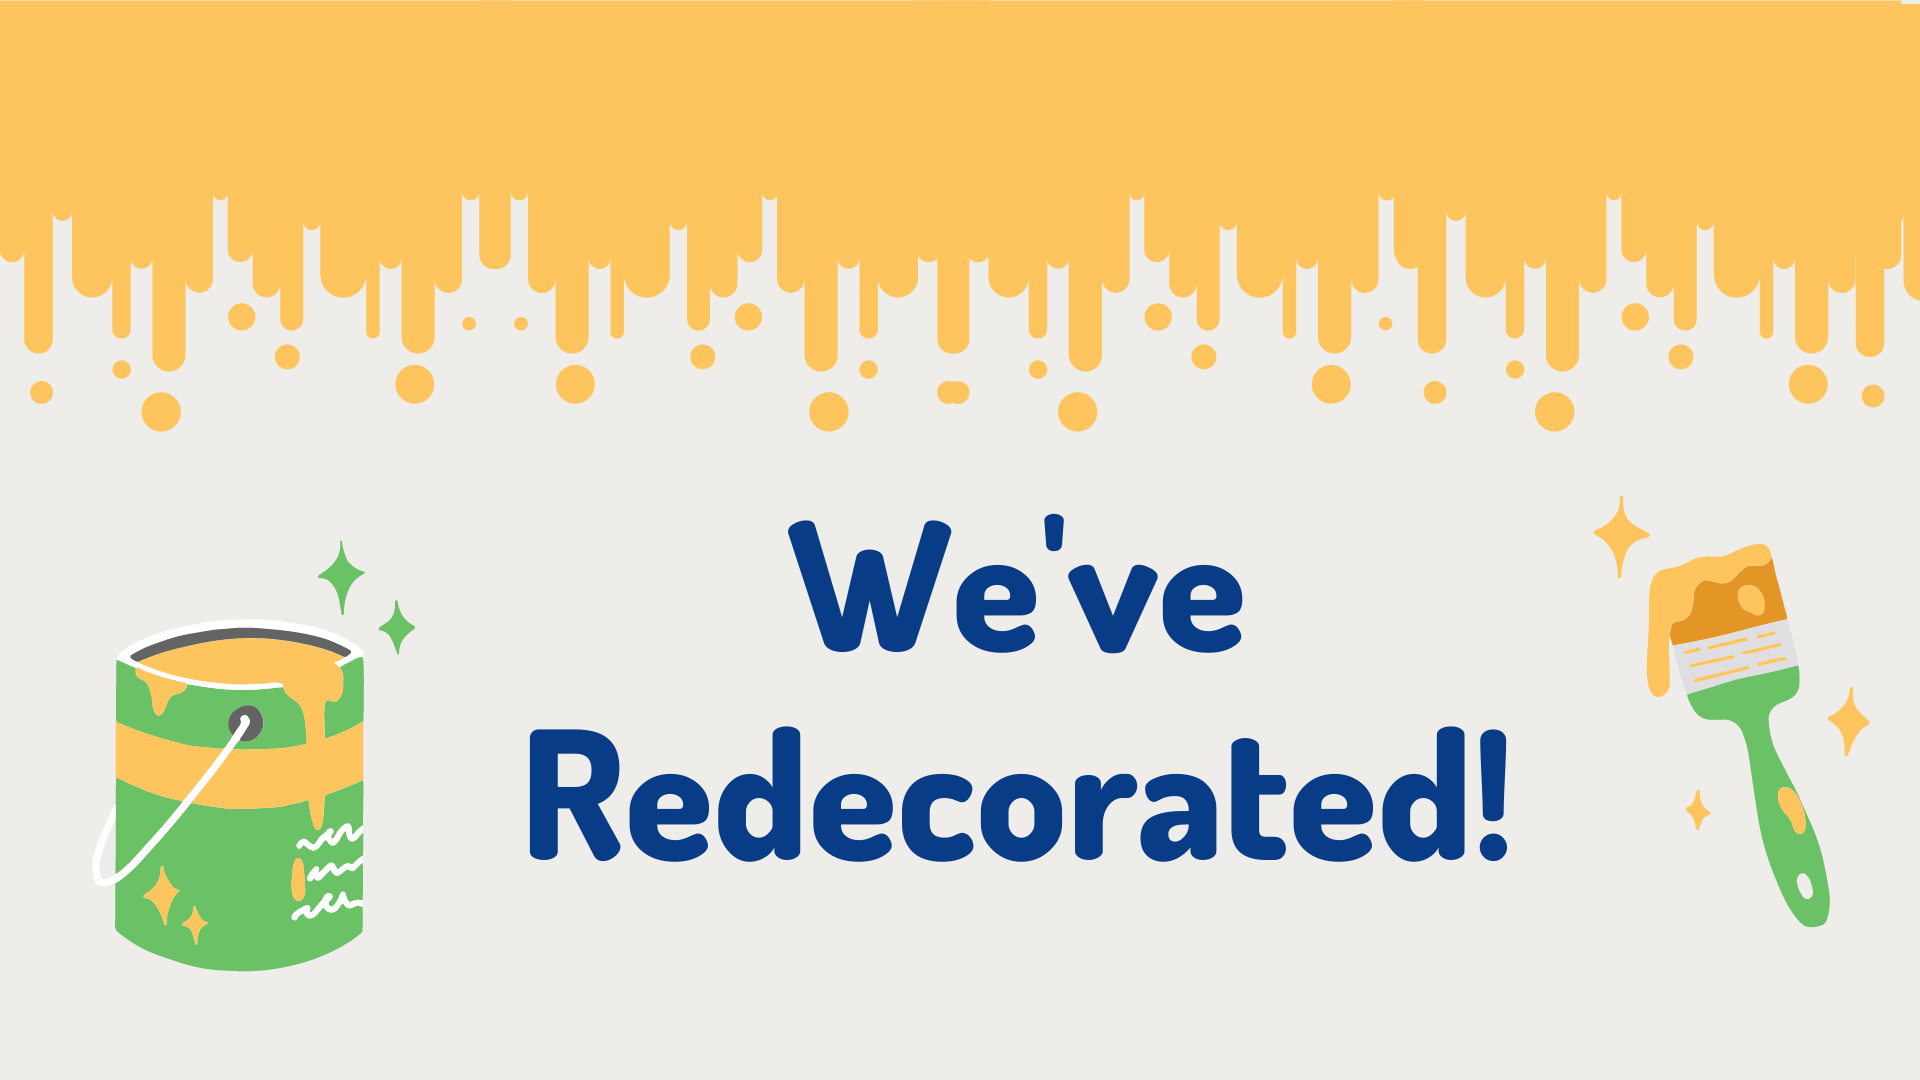 Painted wall graphic with "we've redecorated" text